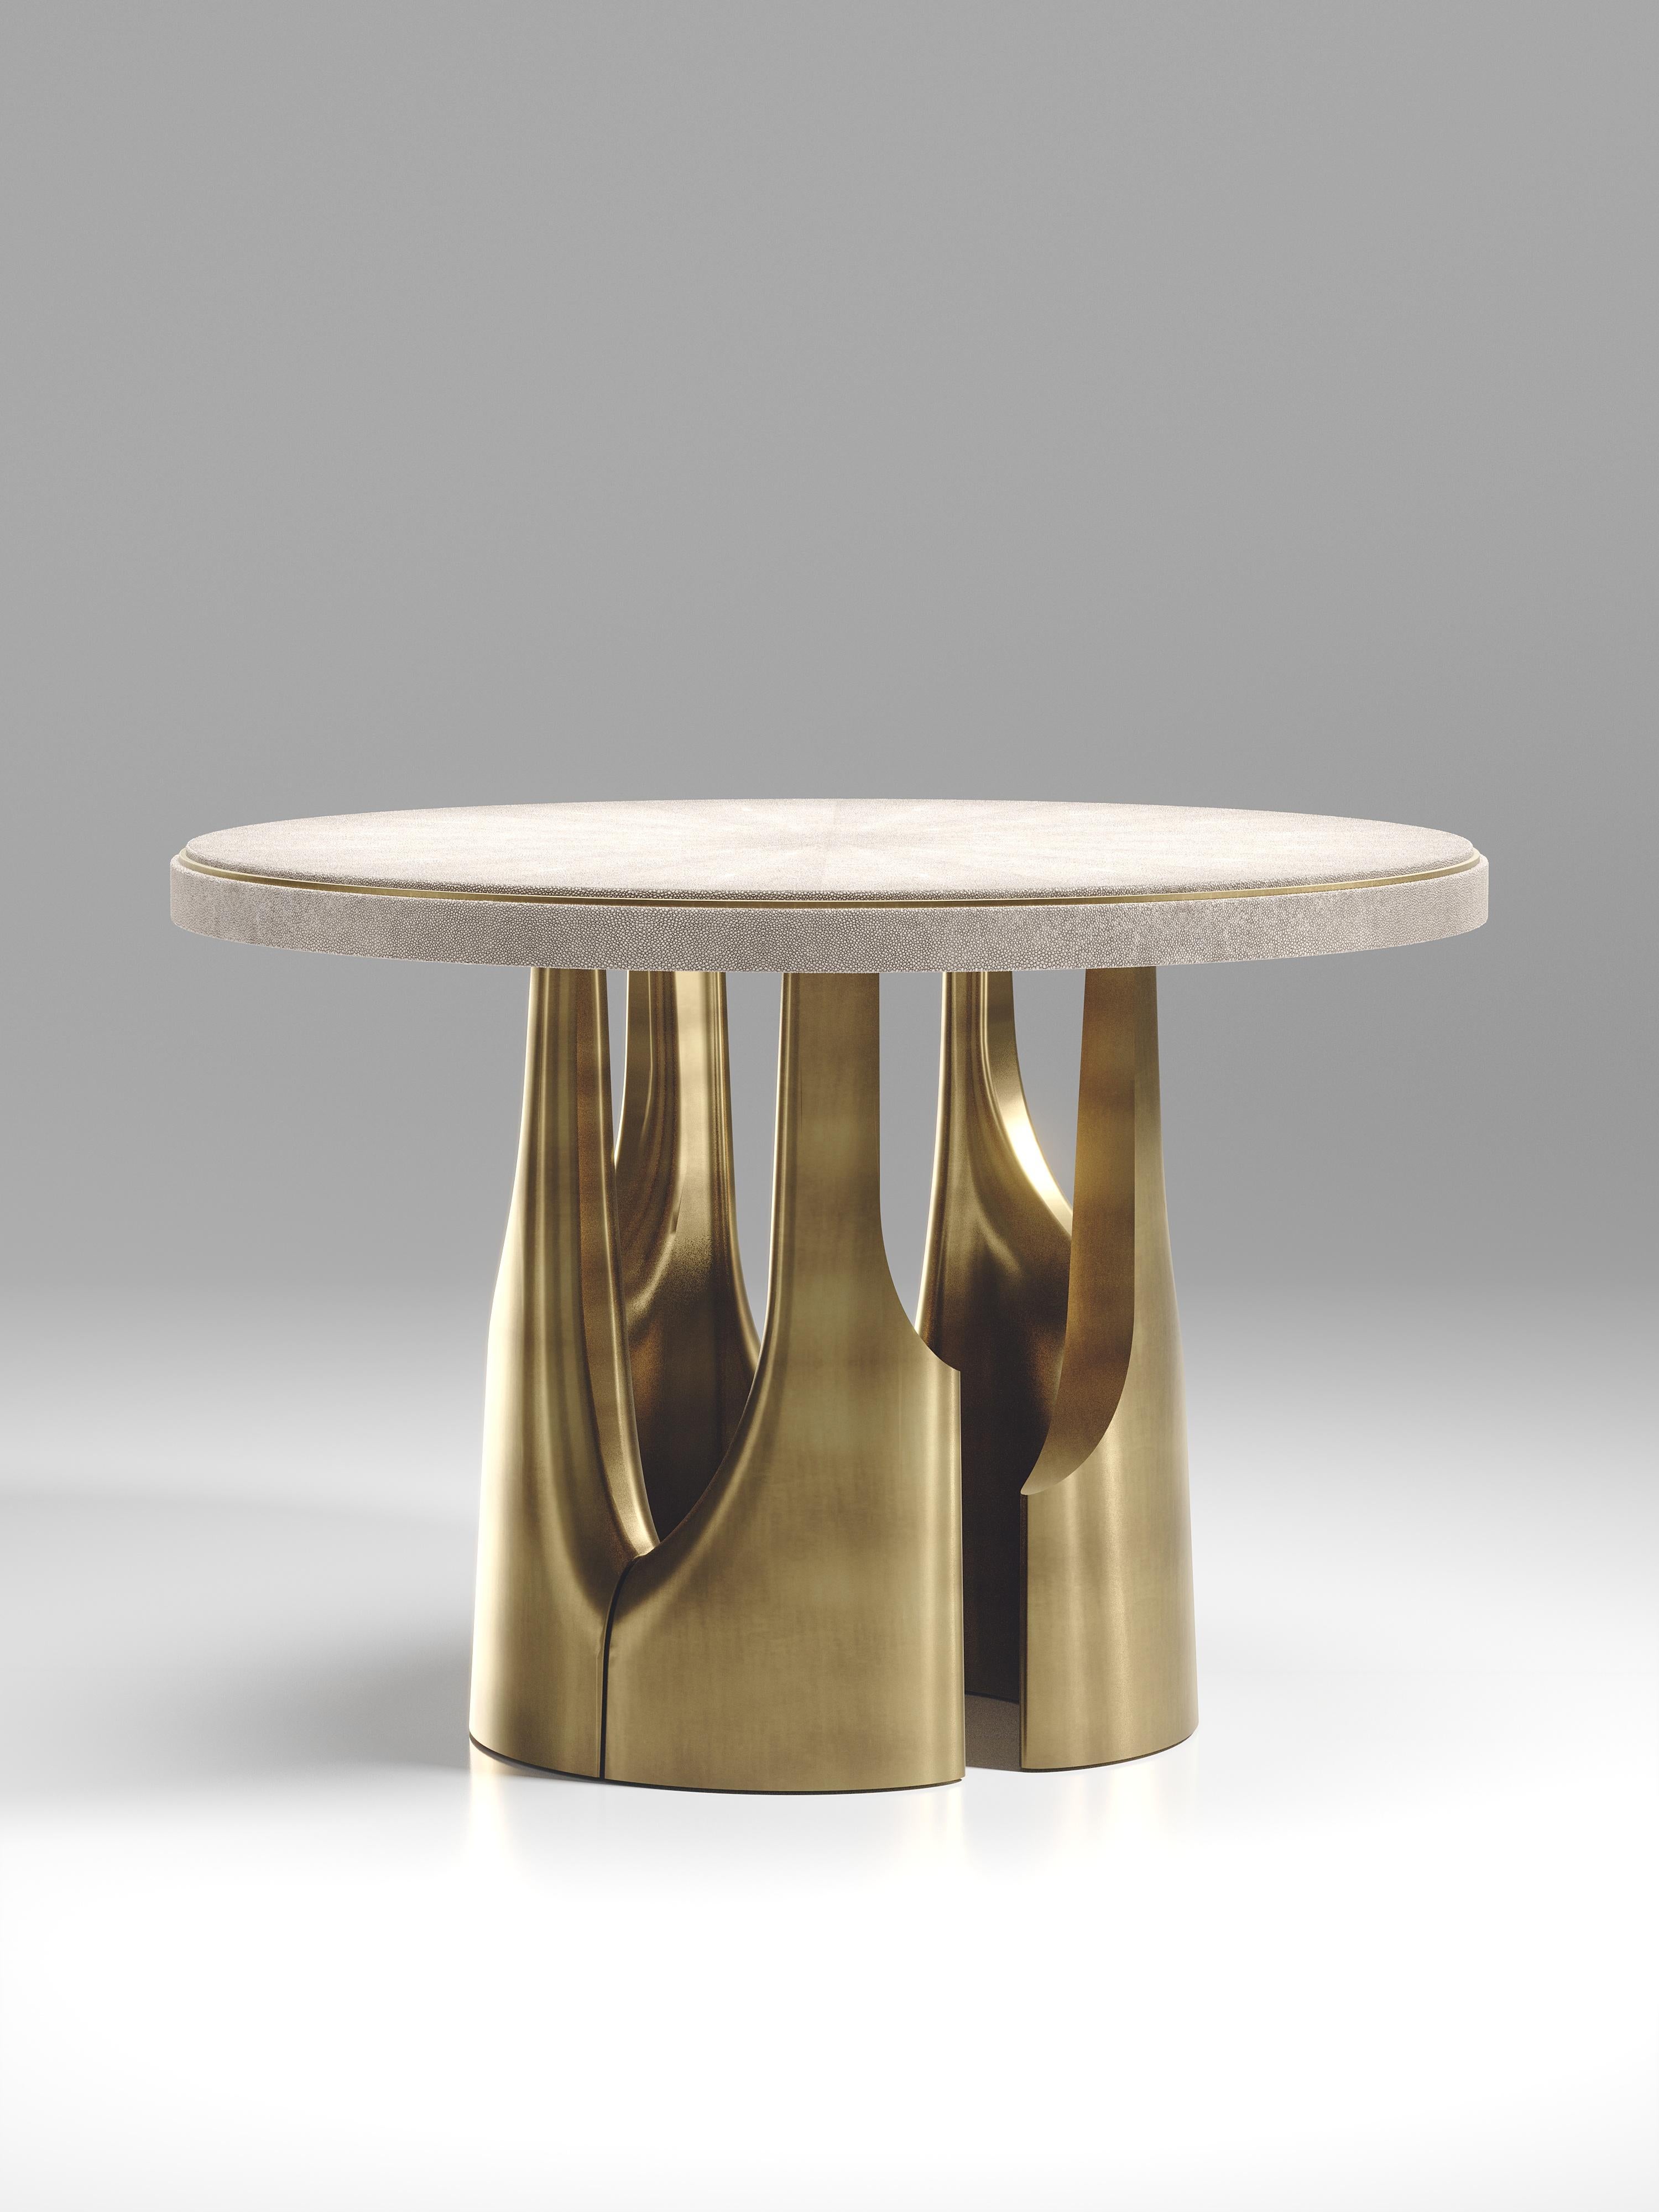 The triptych breakfast table by R&Y Augousti is a stunning multi-faceted sculptural piece. The beautiful hand craved details on the bronze-patina base demonstrate the incredible artisan work of Augousti. The top is inlaid in cream shagreen.